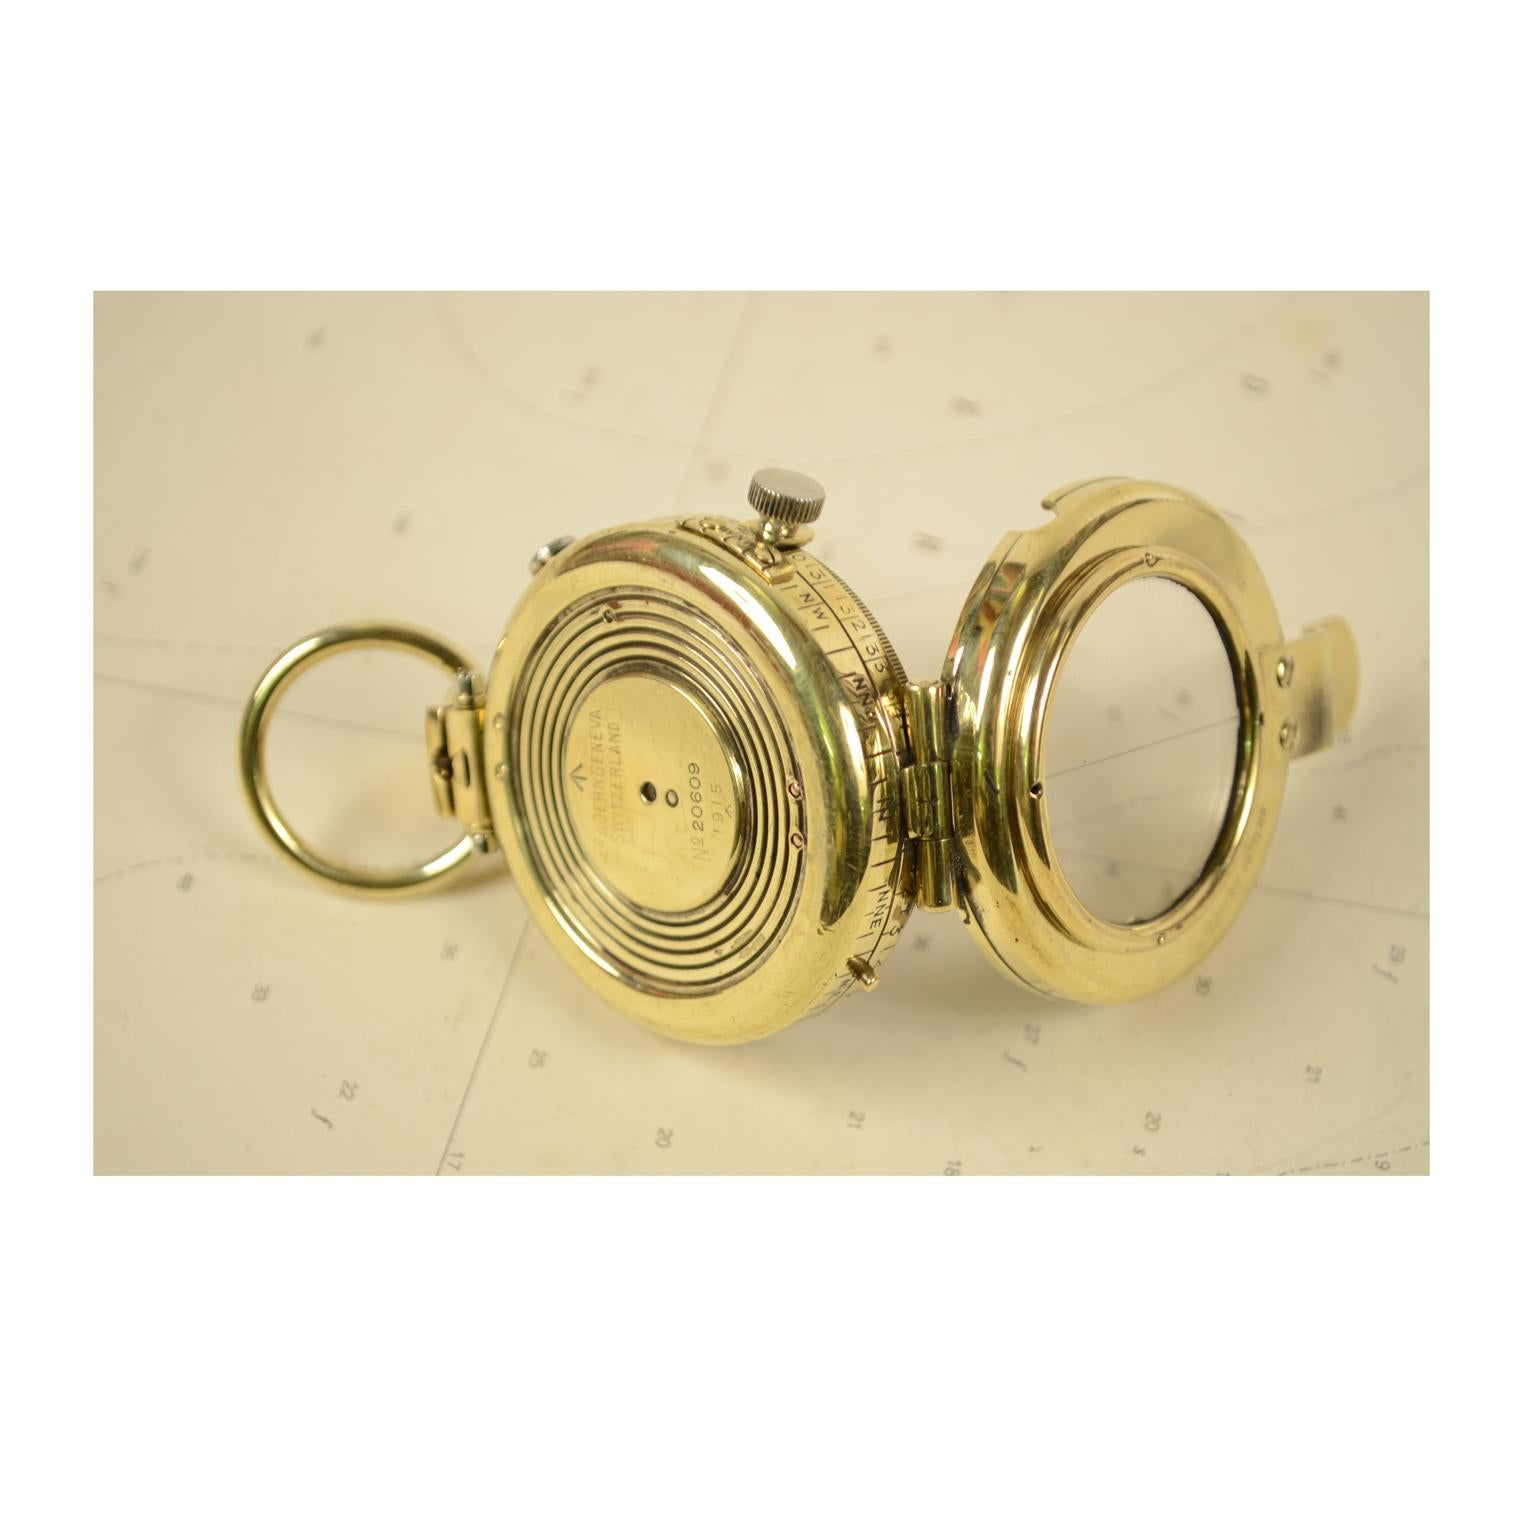 Prismatic Bearing Brass Compass (Messing)